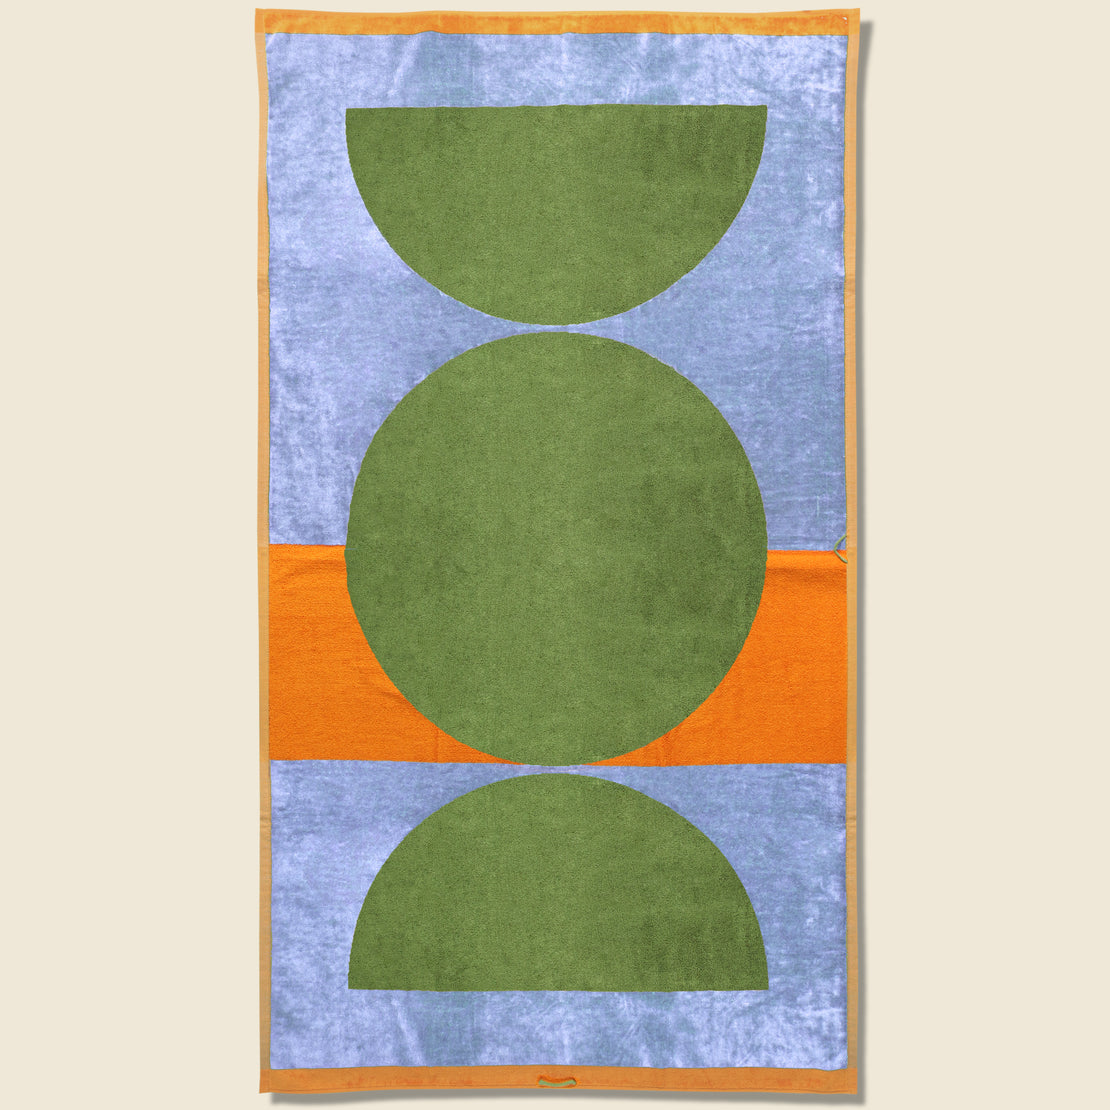 Ellipse Towel - Green/Orange/Blue - Lateral Objects - STAG Provisions - Gift - Towel